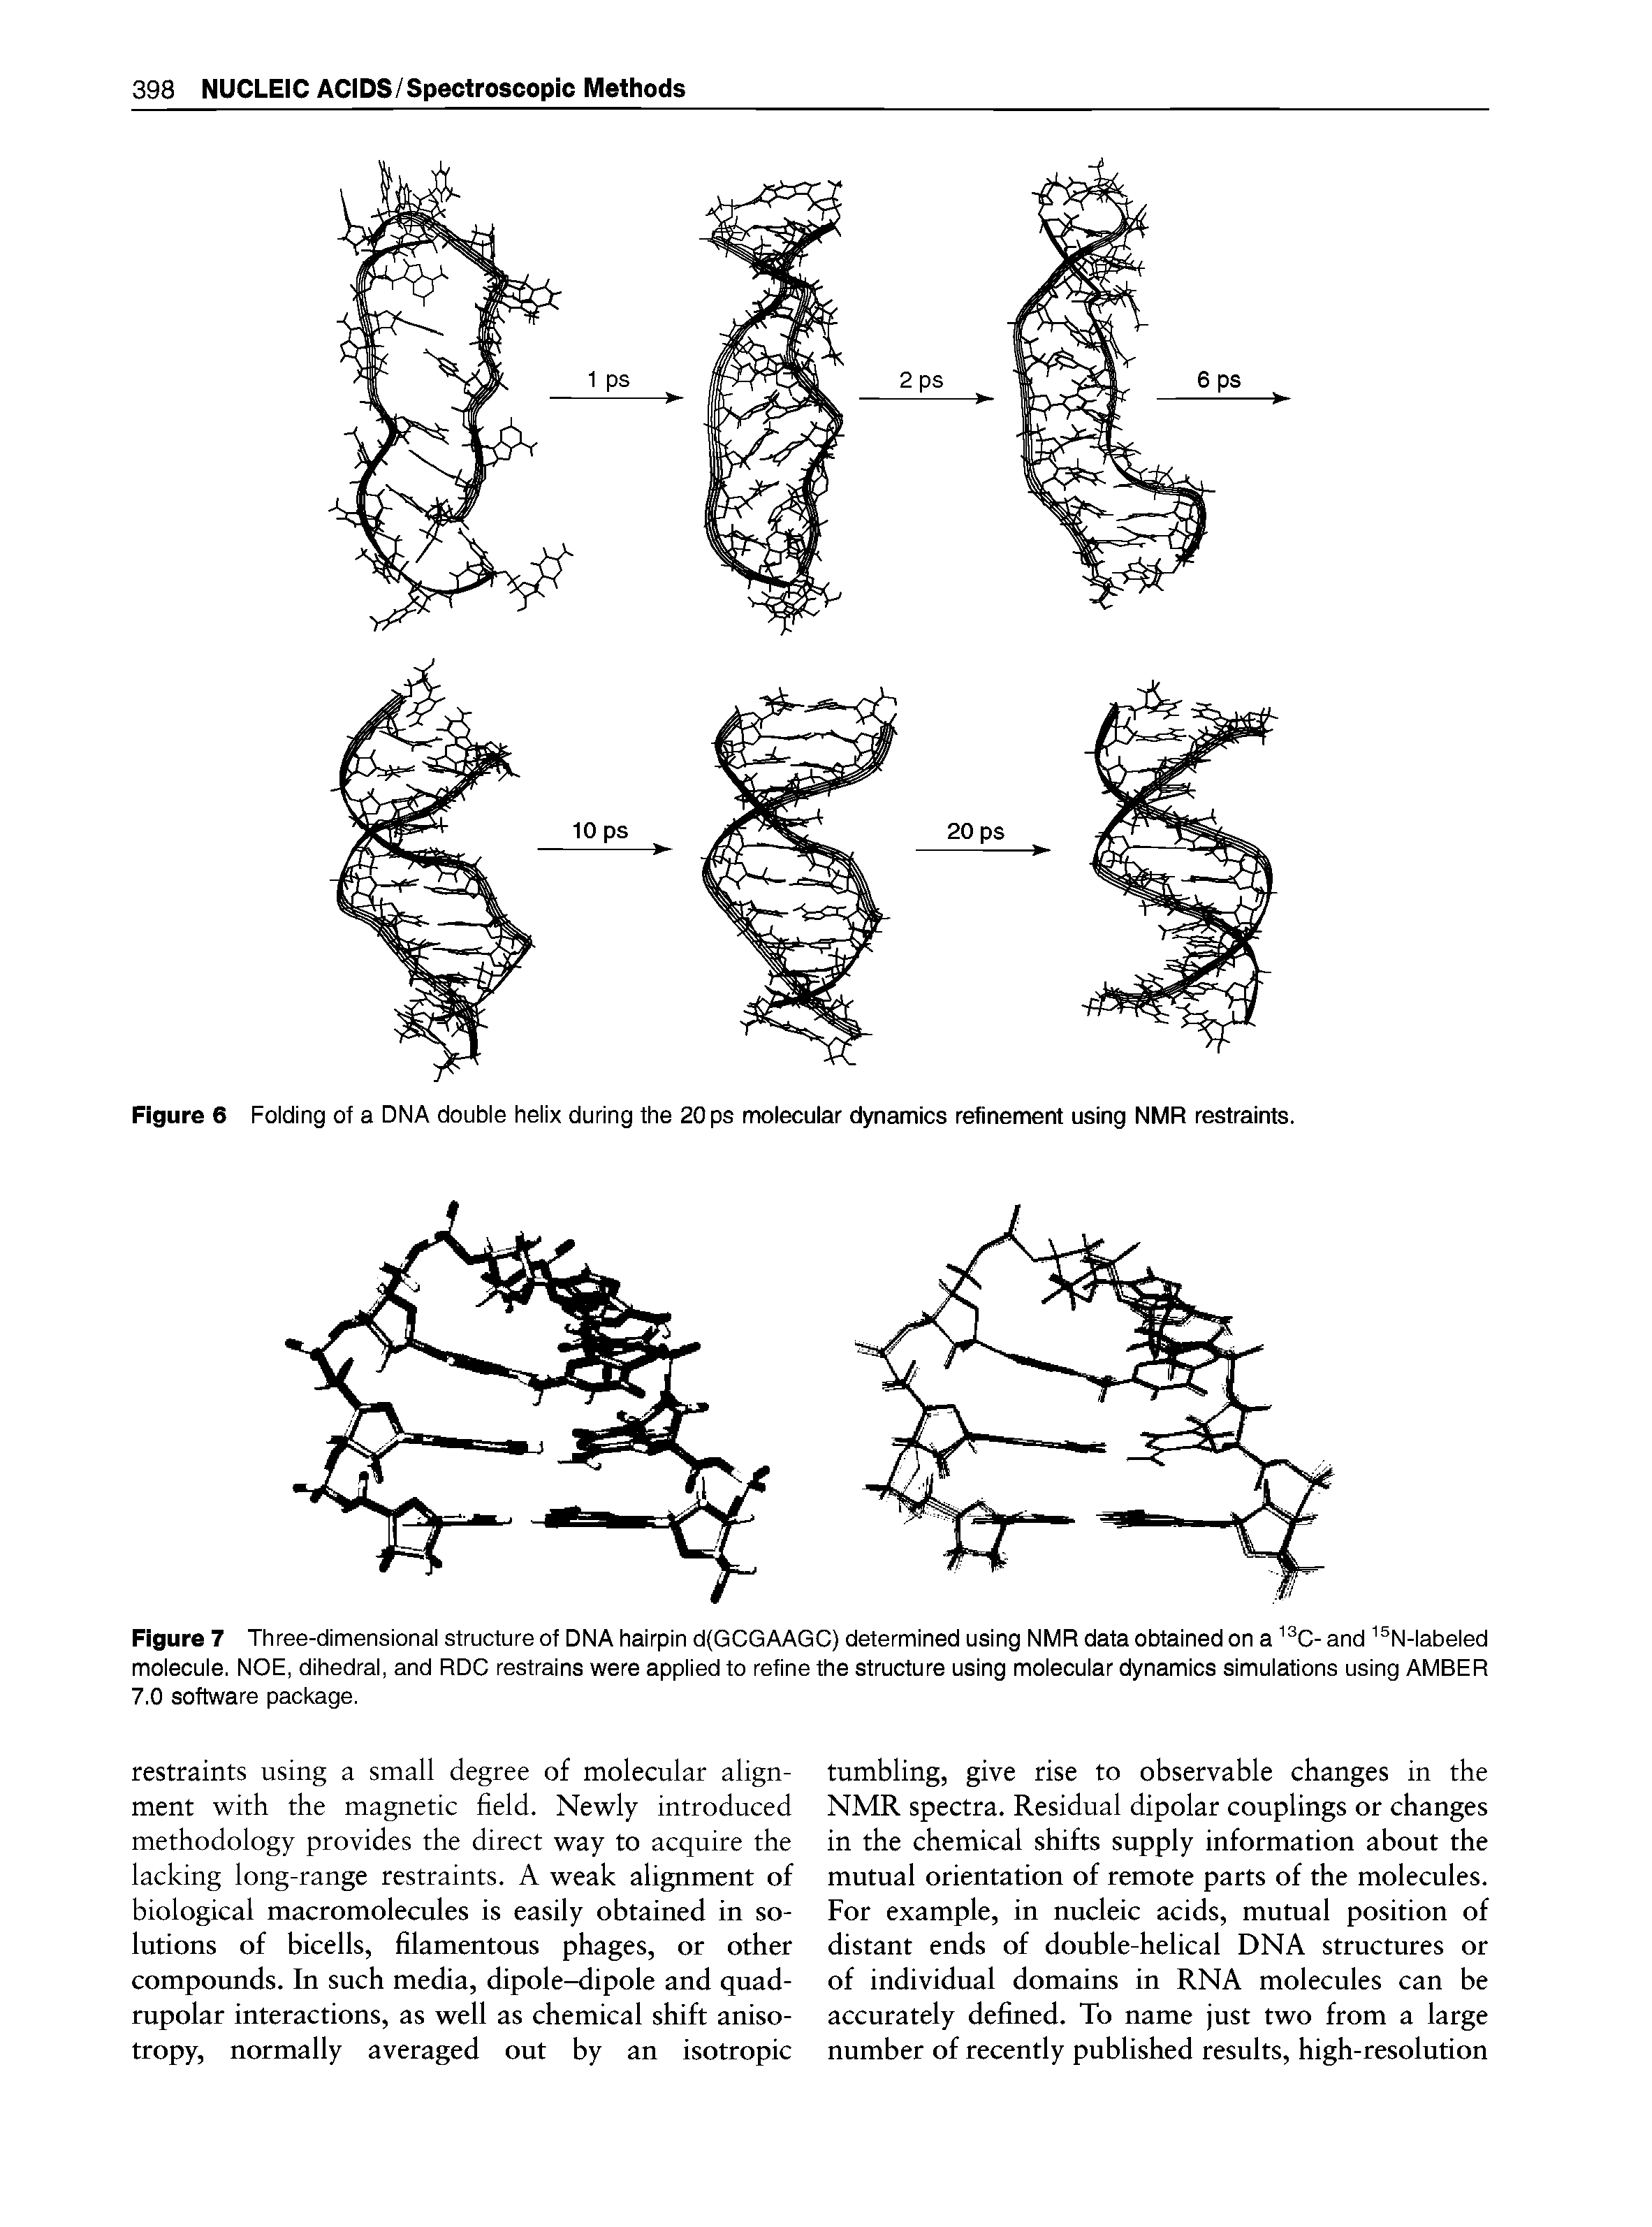 Figure 7 Three-dimensional structure of DNA hairpin d(GCGAAGC) determined using NMR data obtained on a C- and N-labeled molecule. NOE, dihedral, and RDC restrains were applied to refine the structure using molecular dynamics simulations using AMBER 7.0 software package.